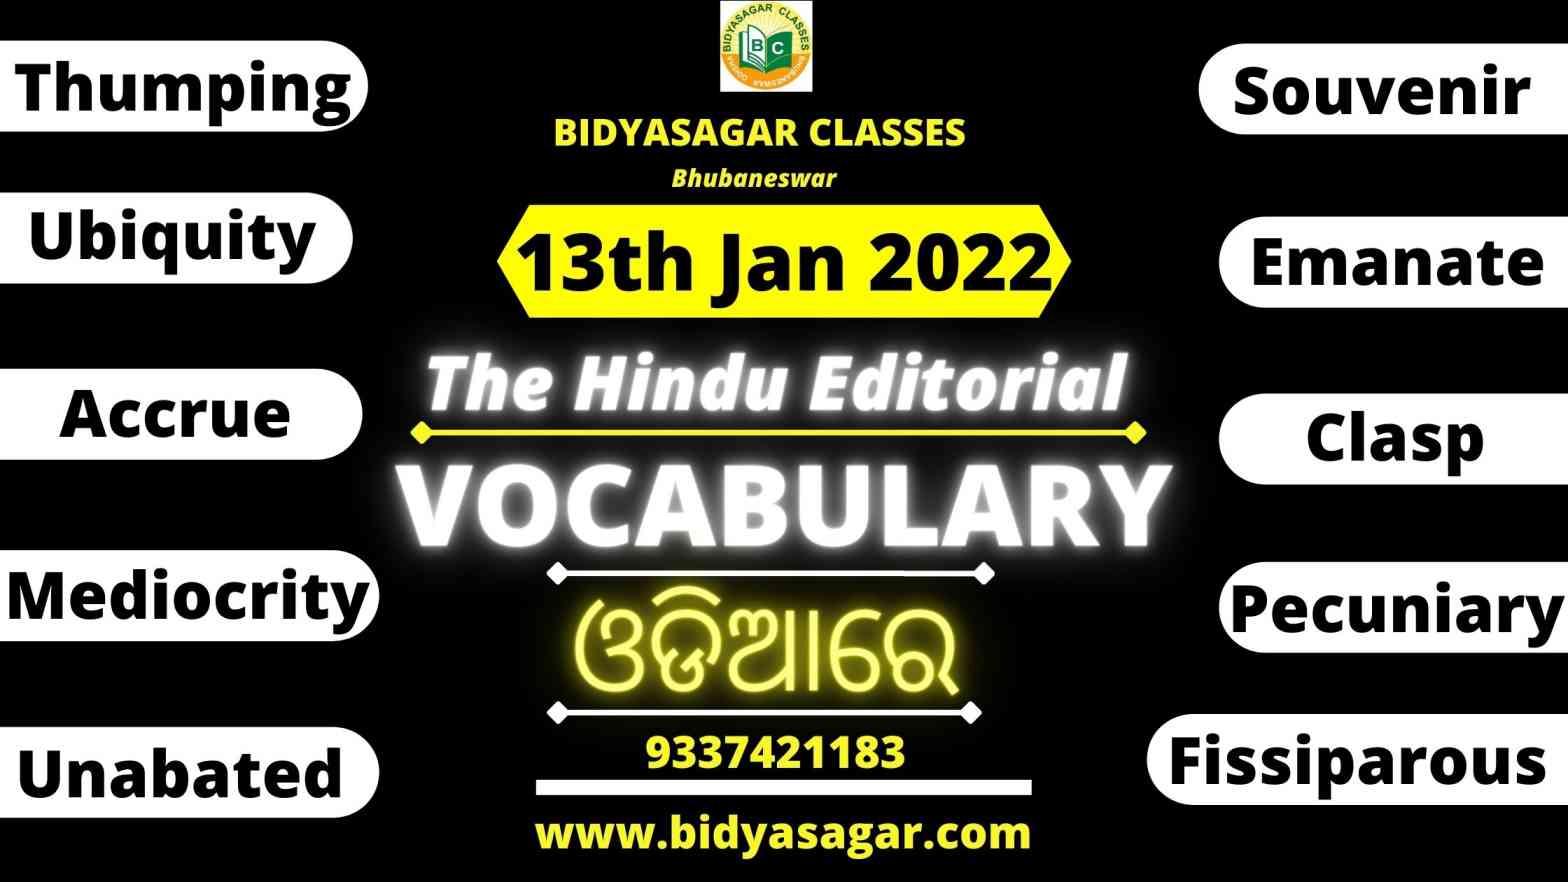 The Hindu Editorial Vocabulary of 13th January 2022